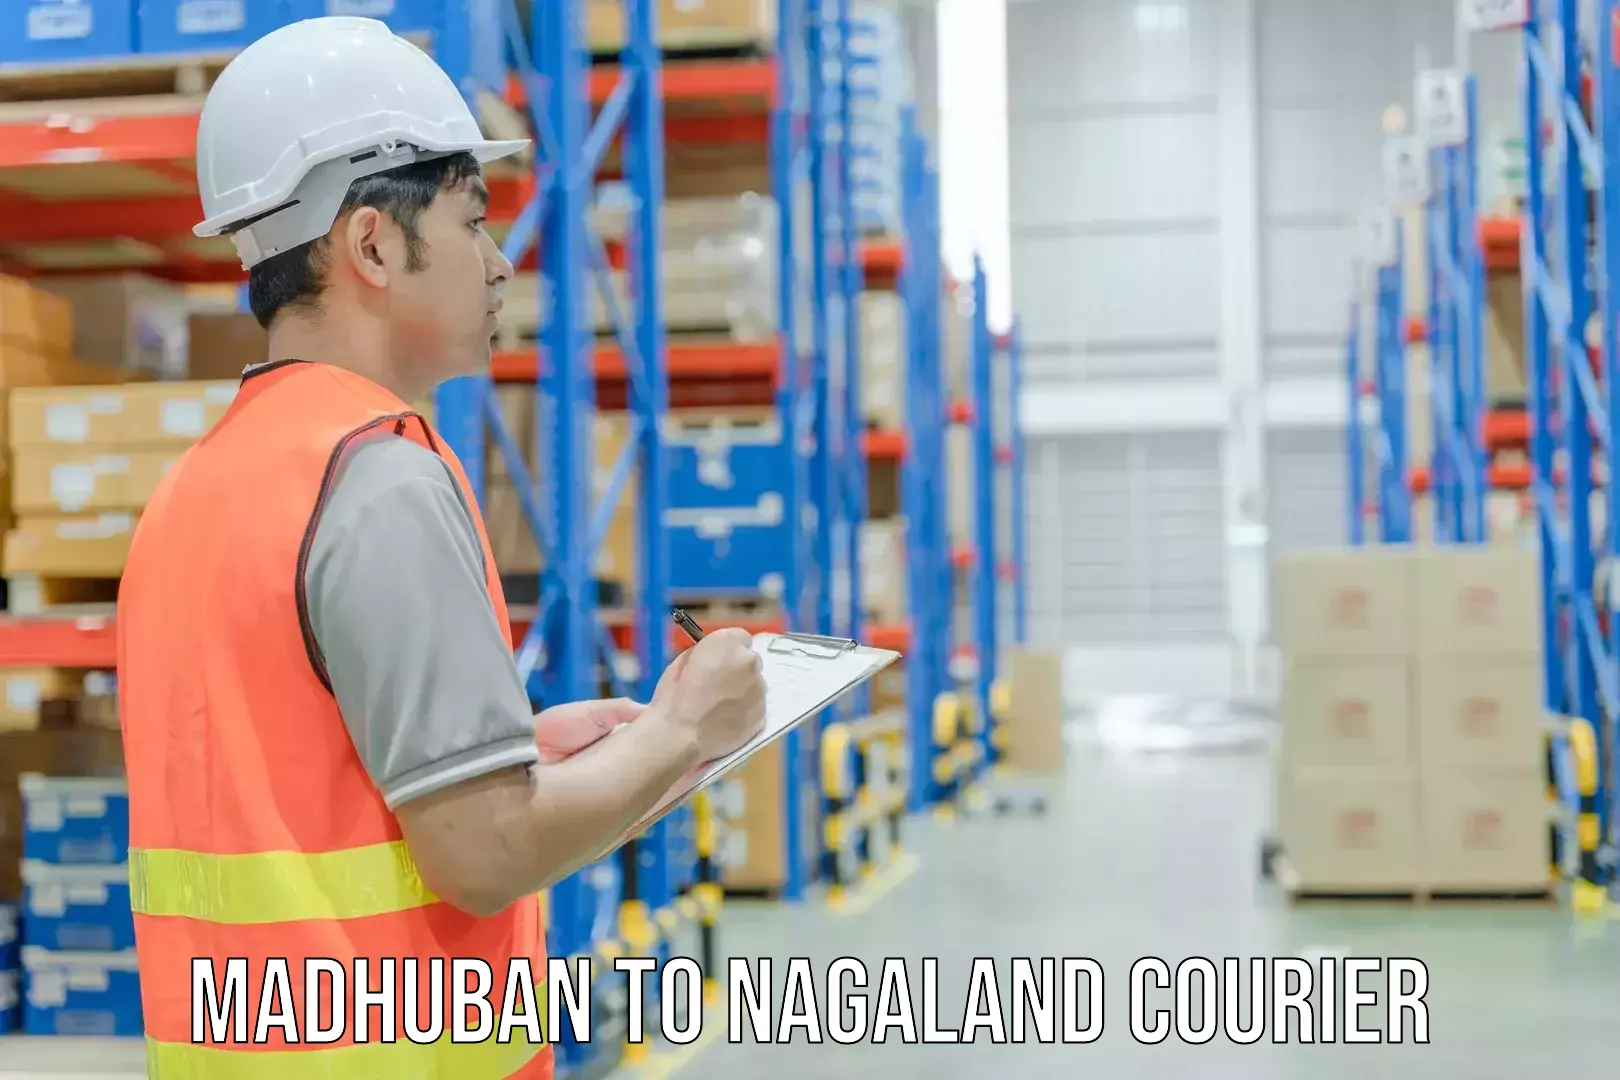 Courier service efficiency Madhuban to Nagaland